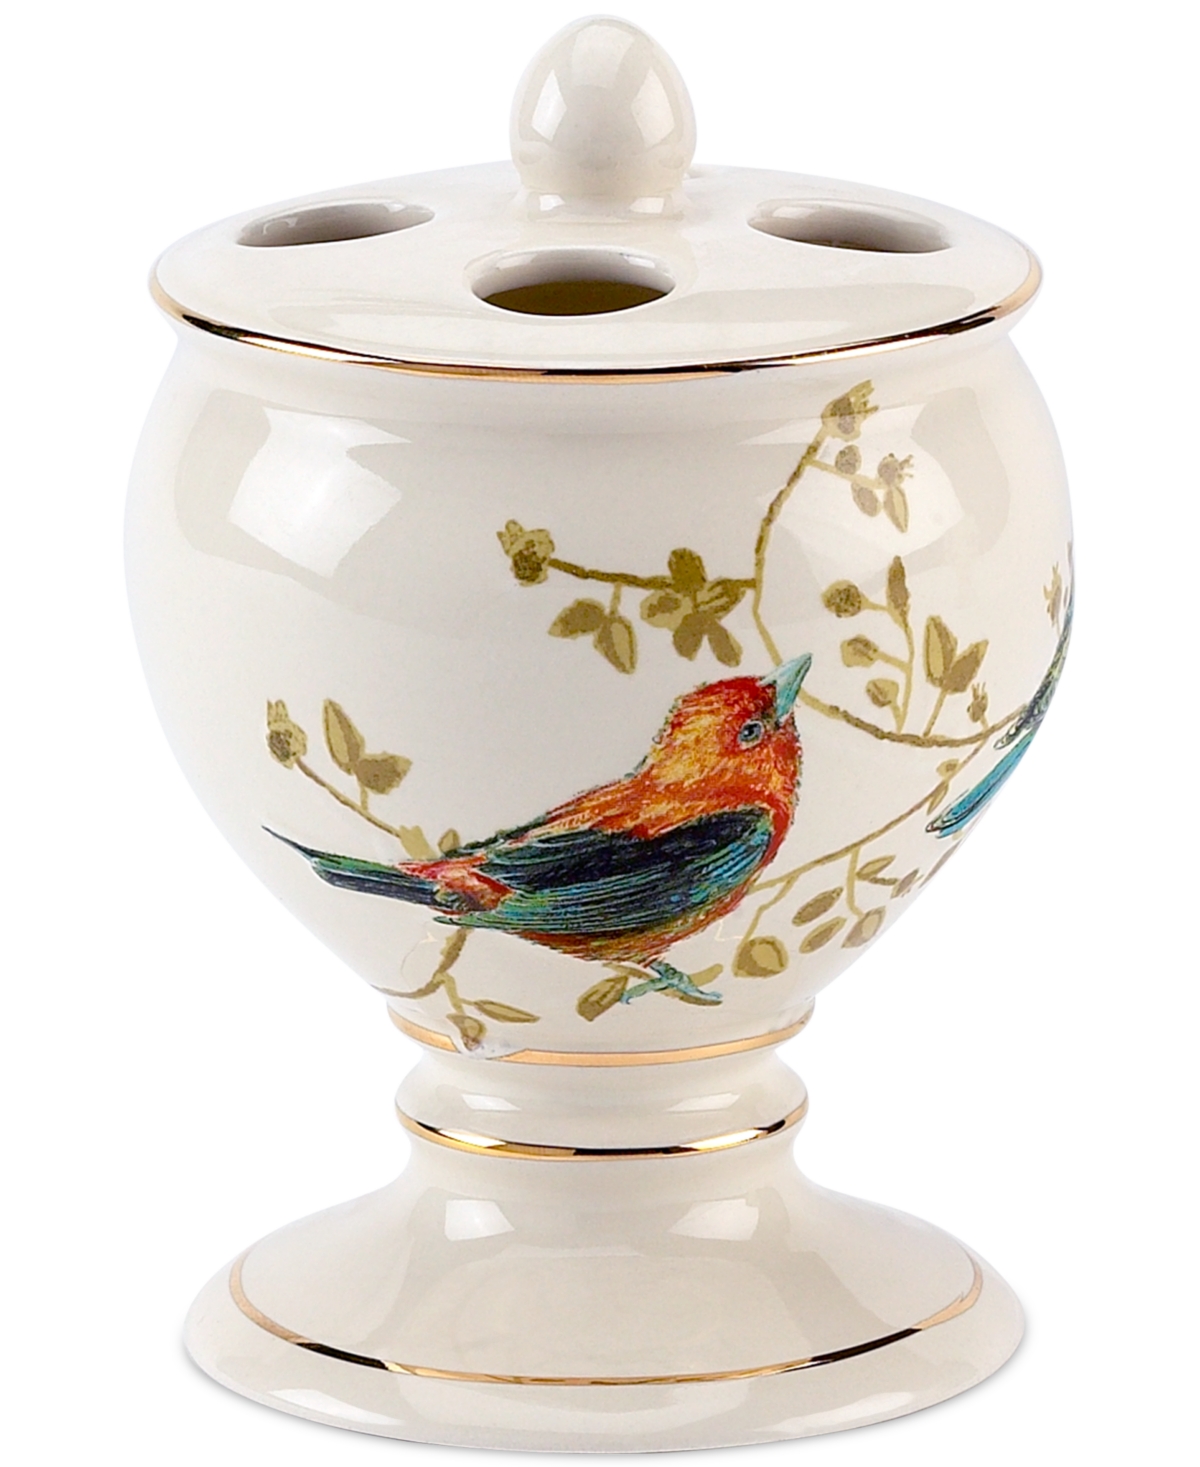 Gilded Birds Gold-Accent Ceramic Toothbrush Holder - Ivory